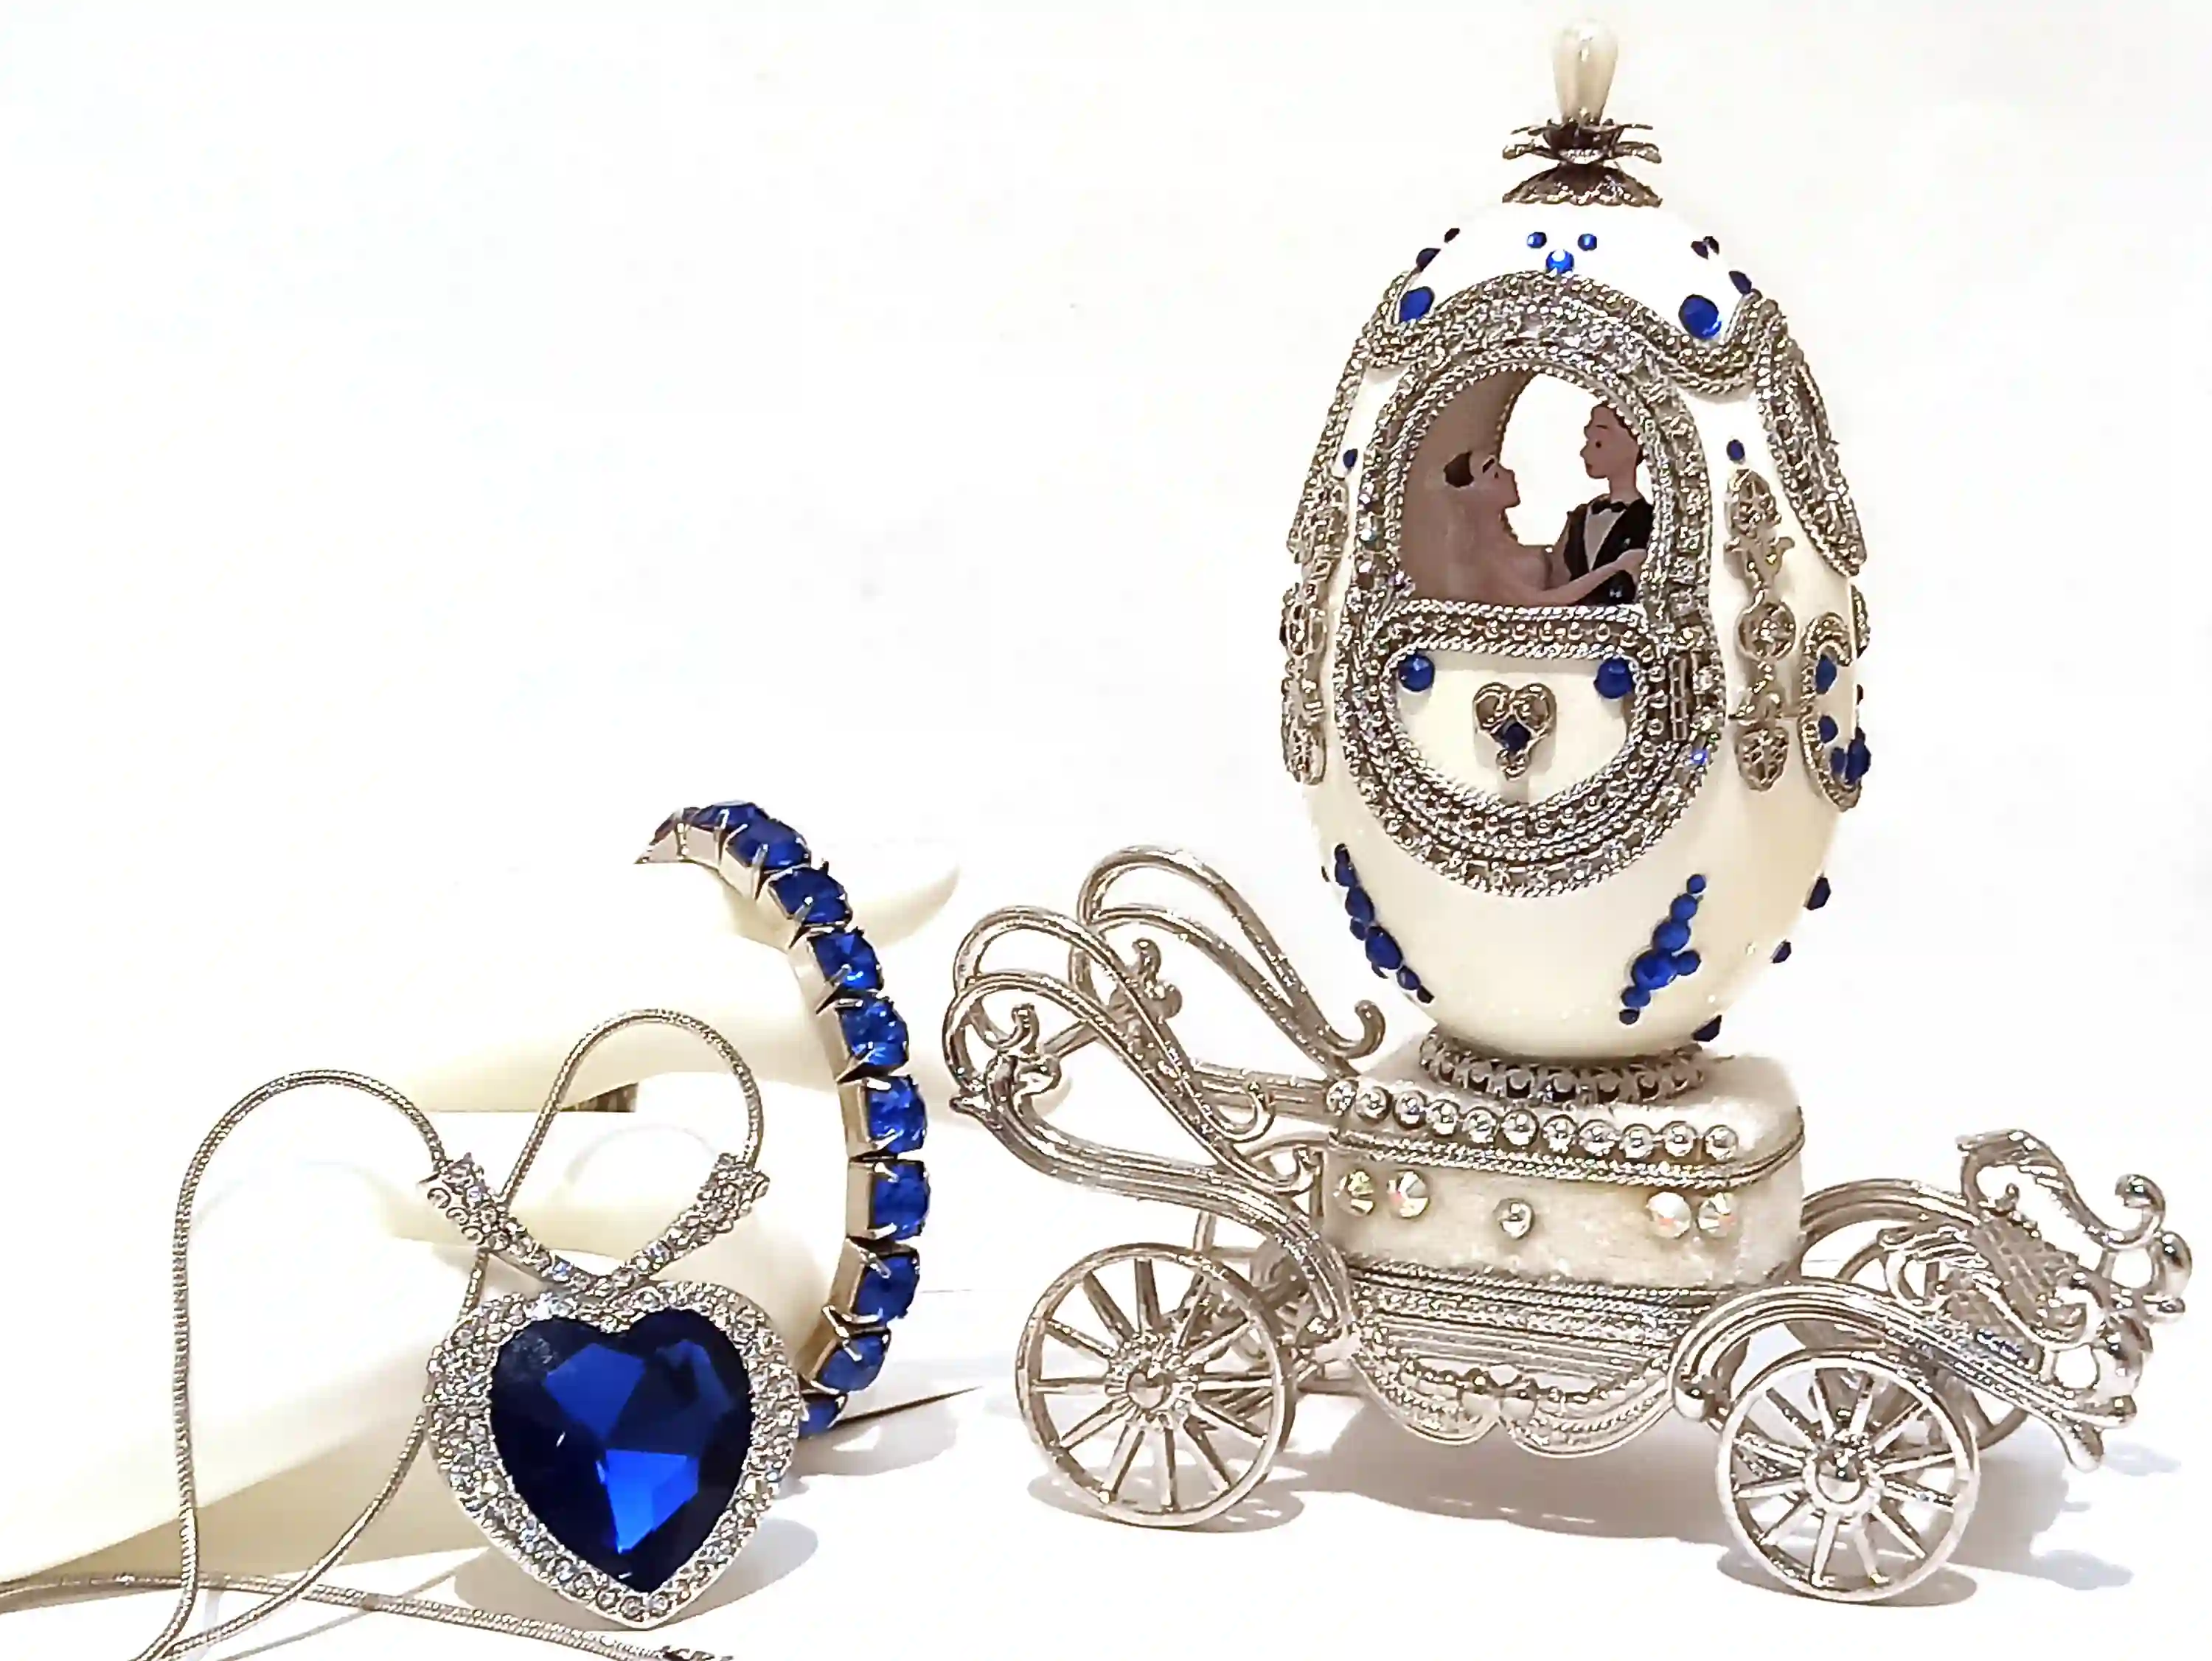 Designer Gifts, ONEOFAKIND, Faberge egg, Large SILVER Heart Ocean Necklace & Tennis Bracelet Faberge egg Music SAPPHIRE Wedding Anniversary 